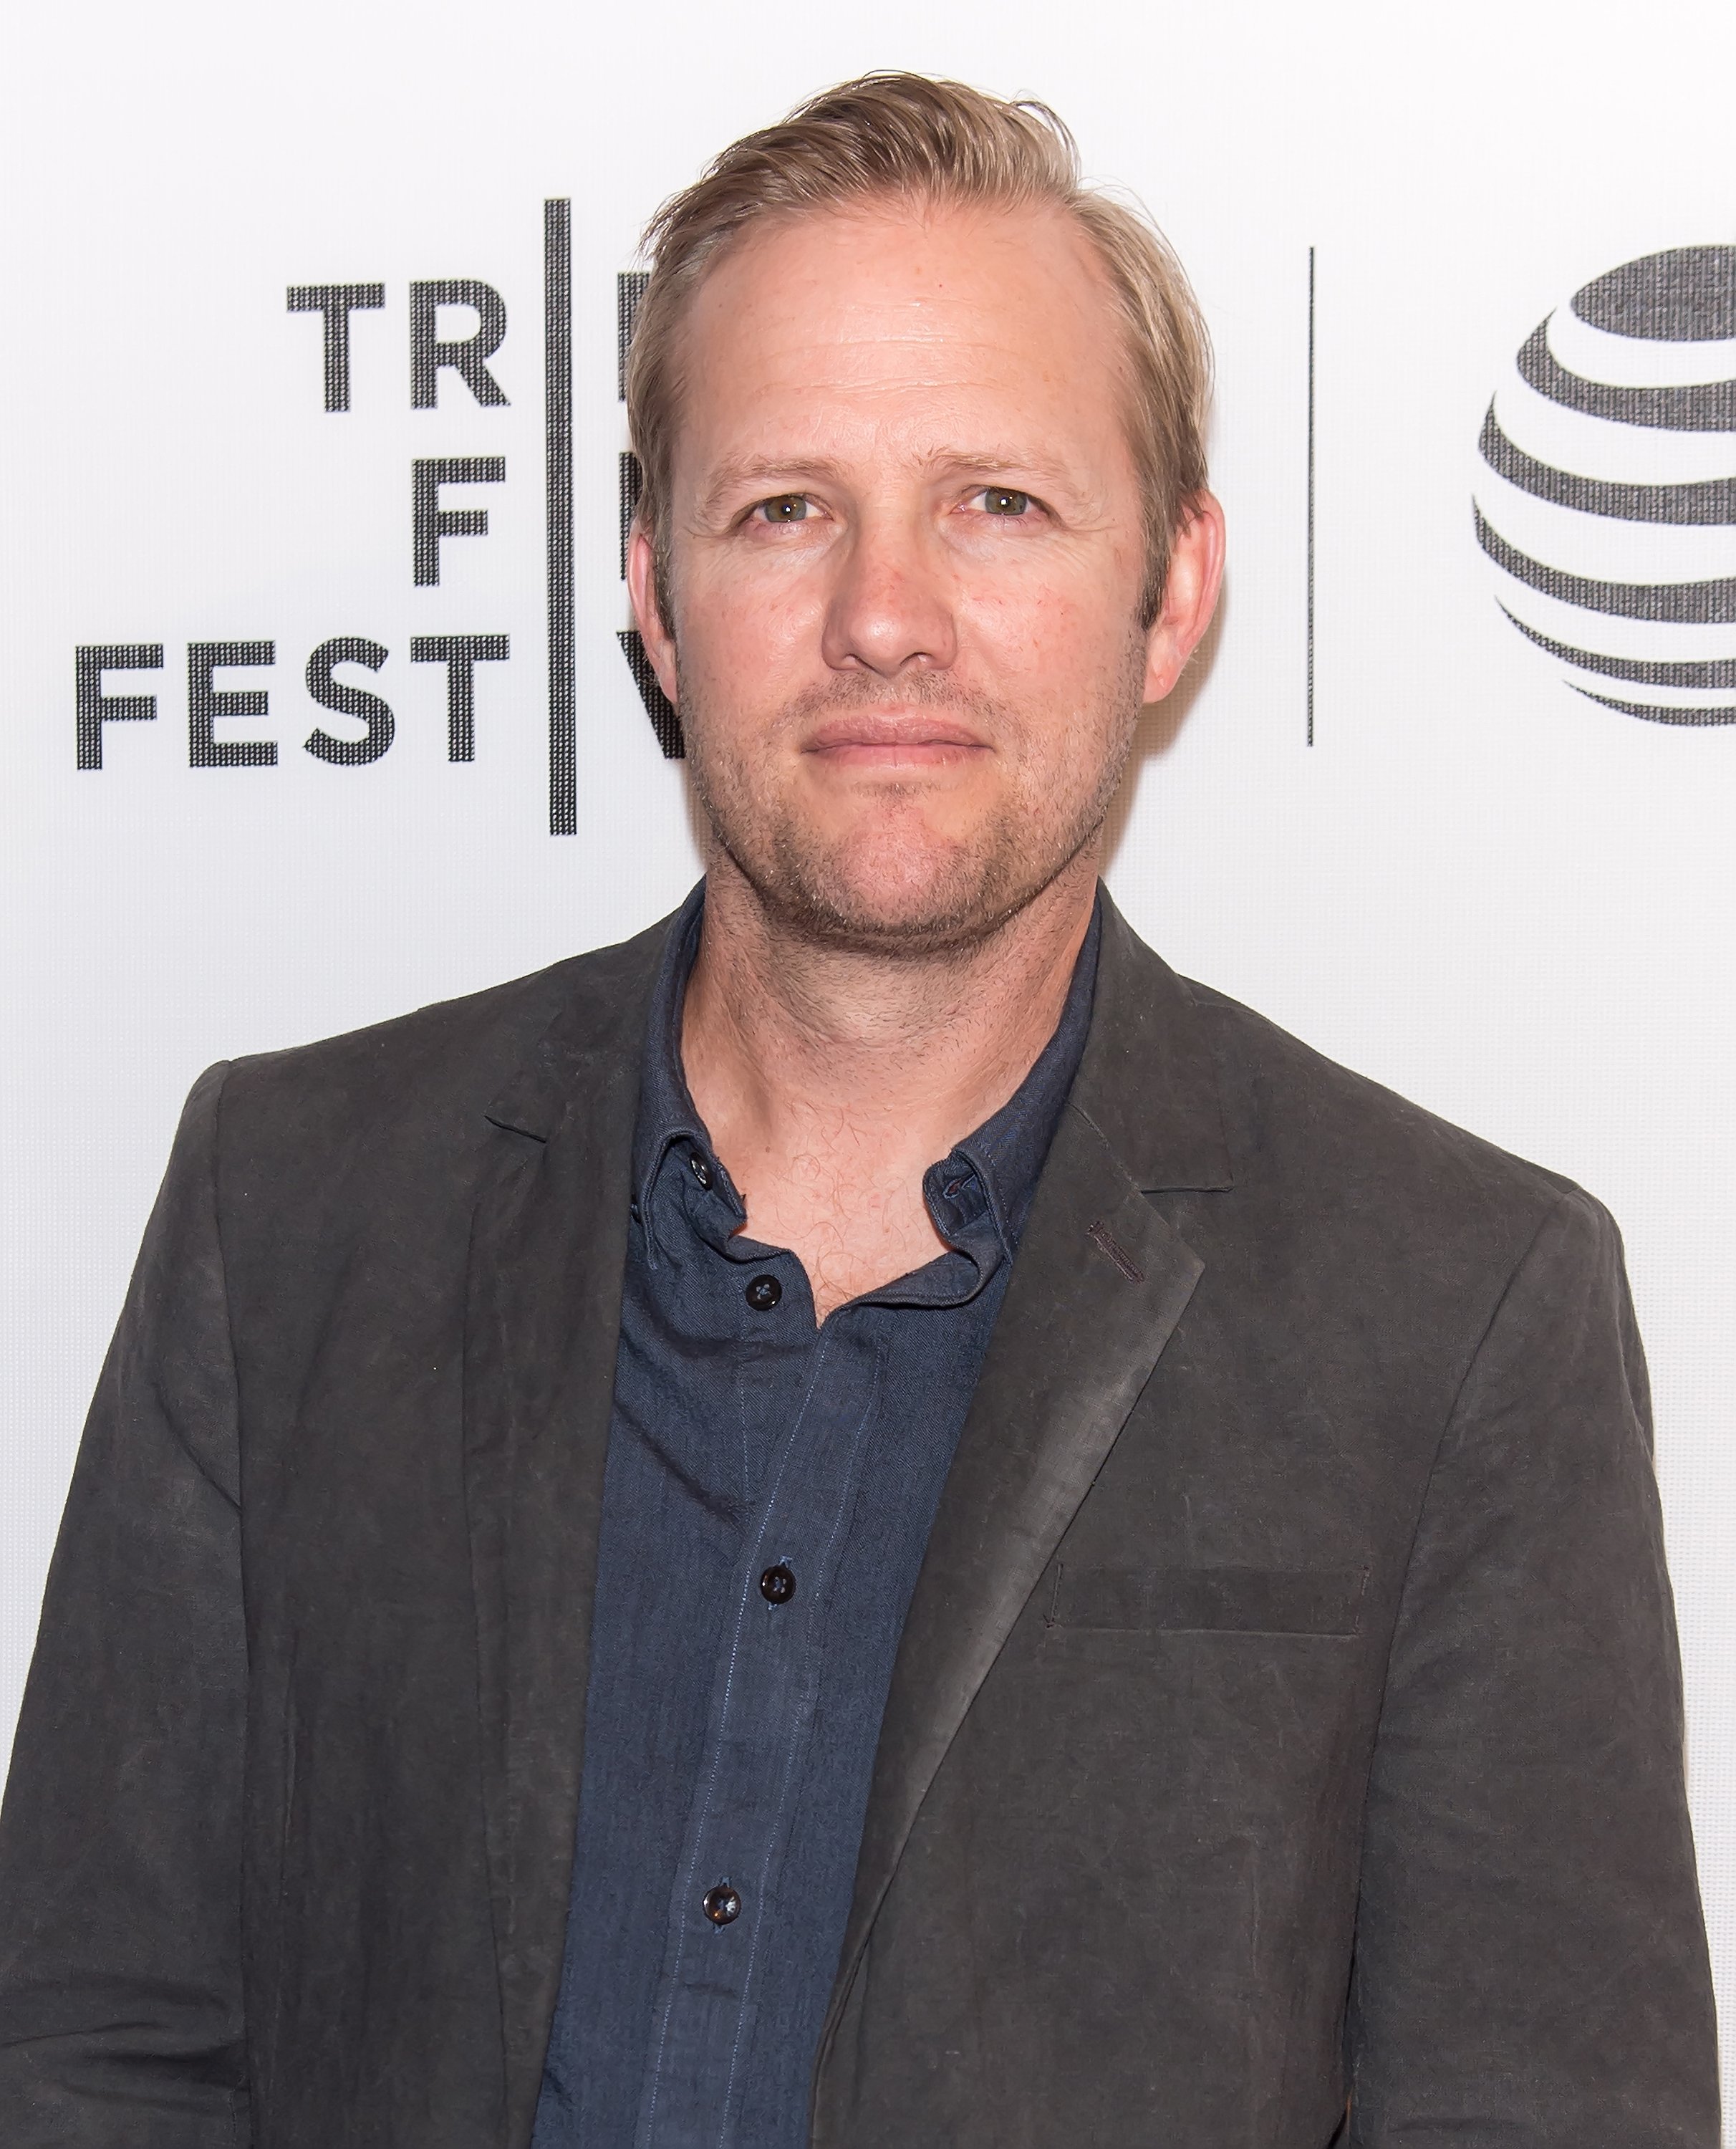 Lee Kirk attends the "Geezer" world premiere during the 2016 Tribeca Film Festival at Festival Hub on April 23, 2016, in New York City. | Source: Getty Images